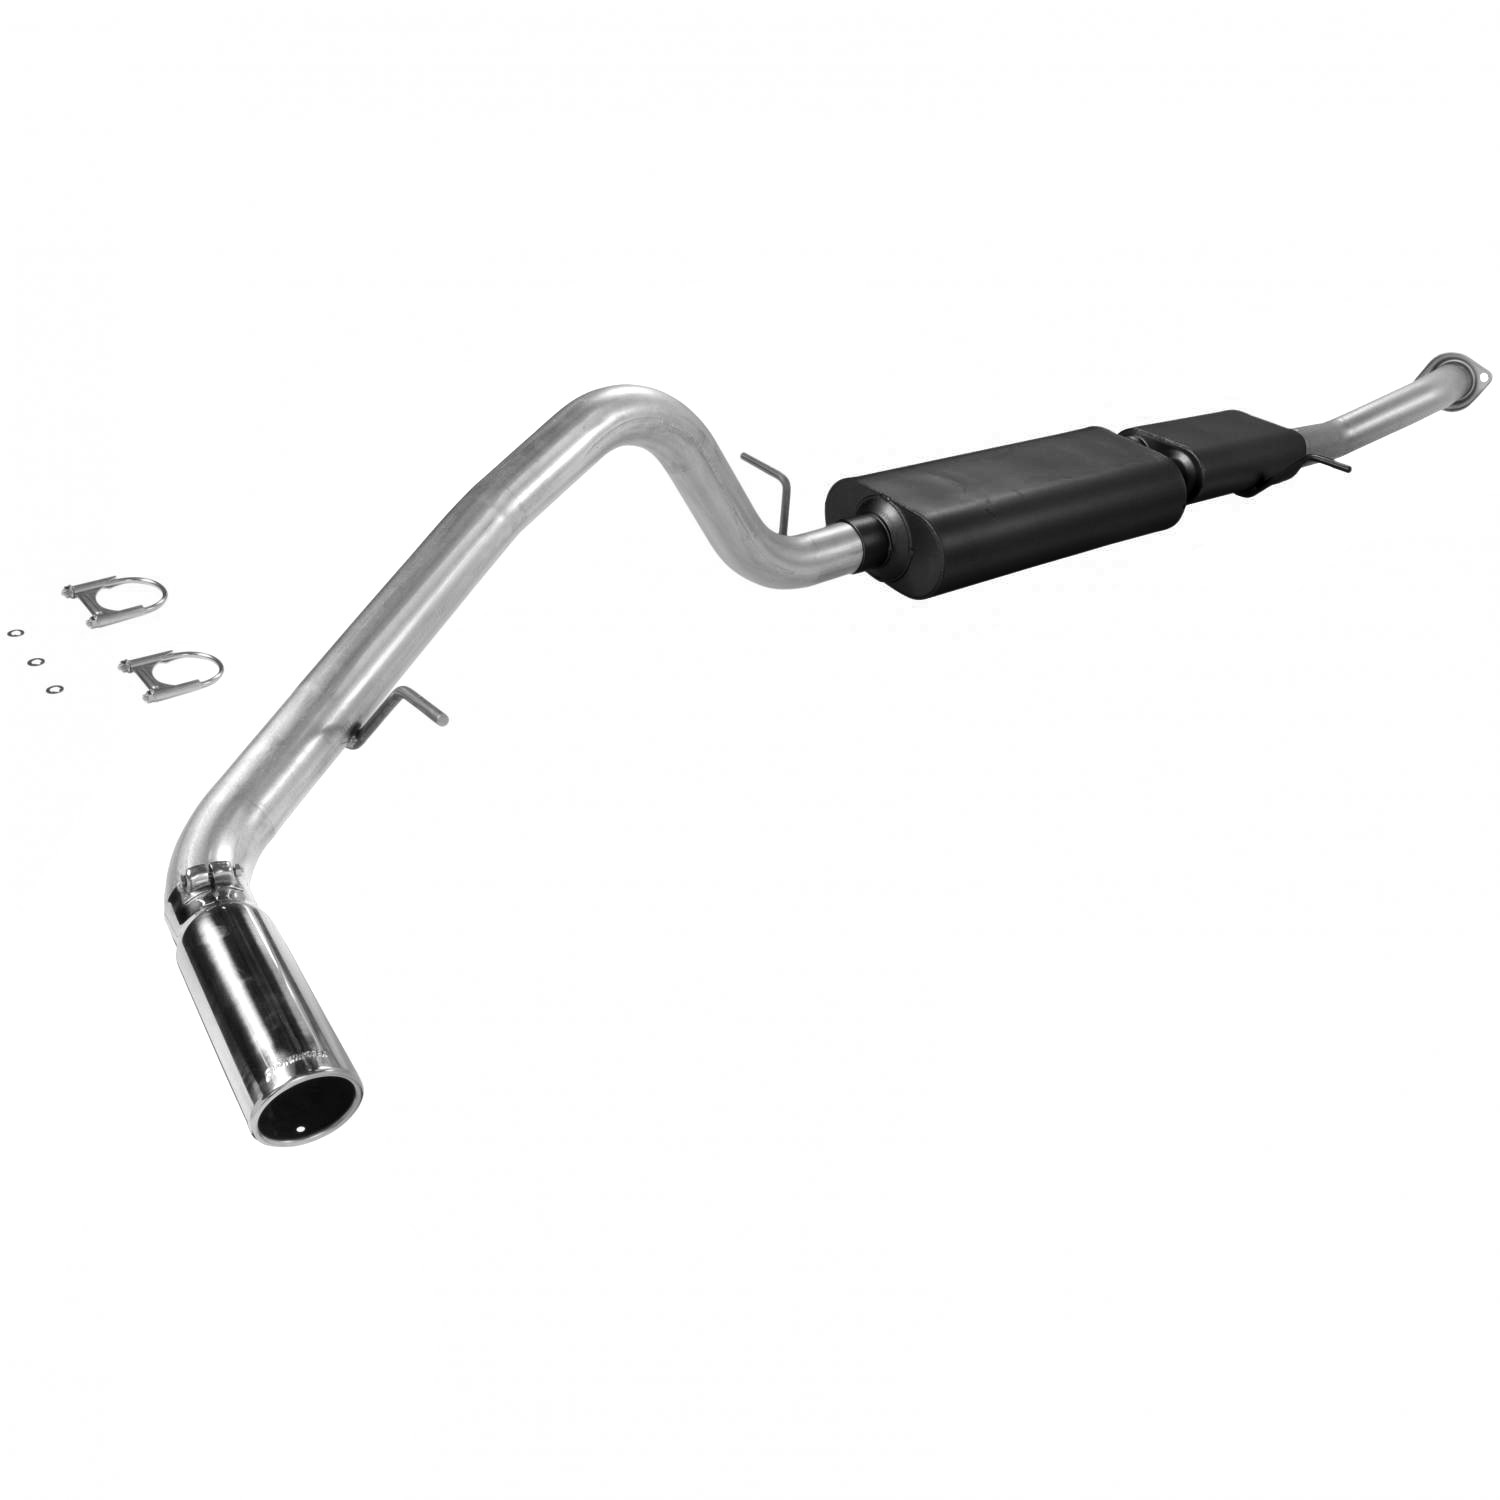 01-06 Avalanche 5.3L Force II Exhaust System